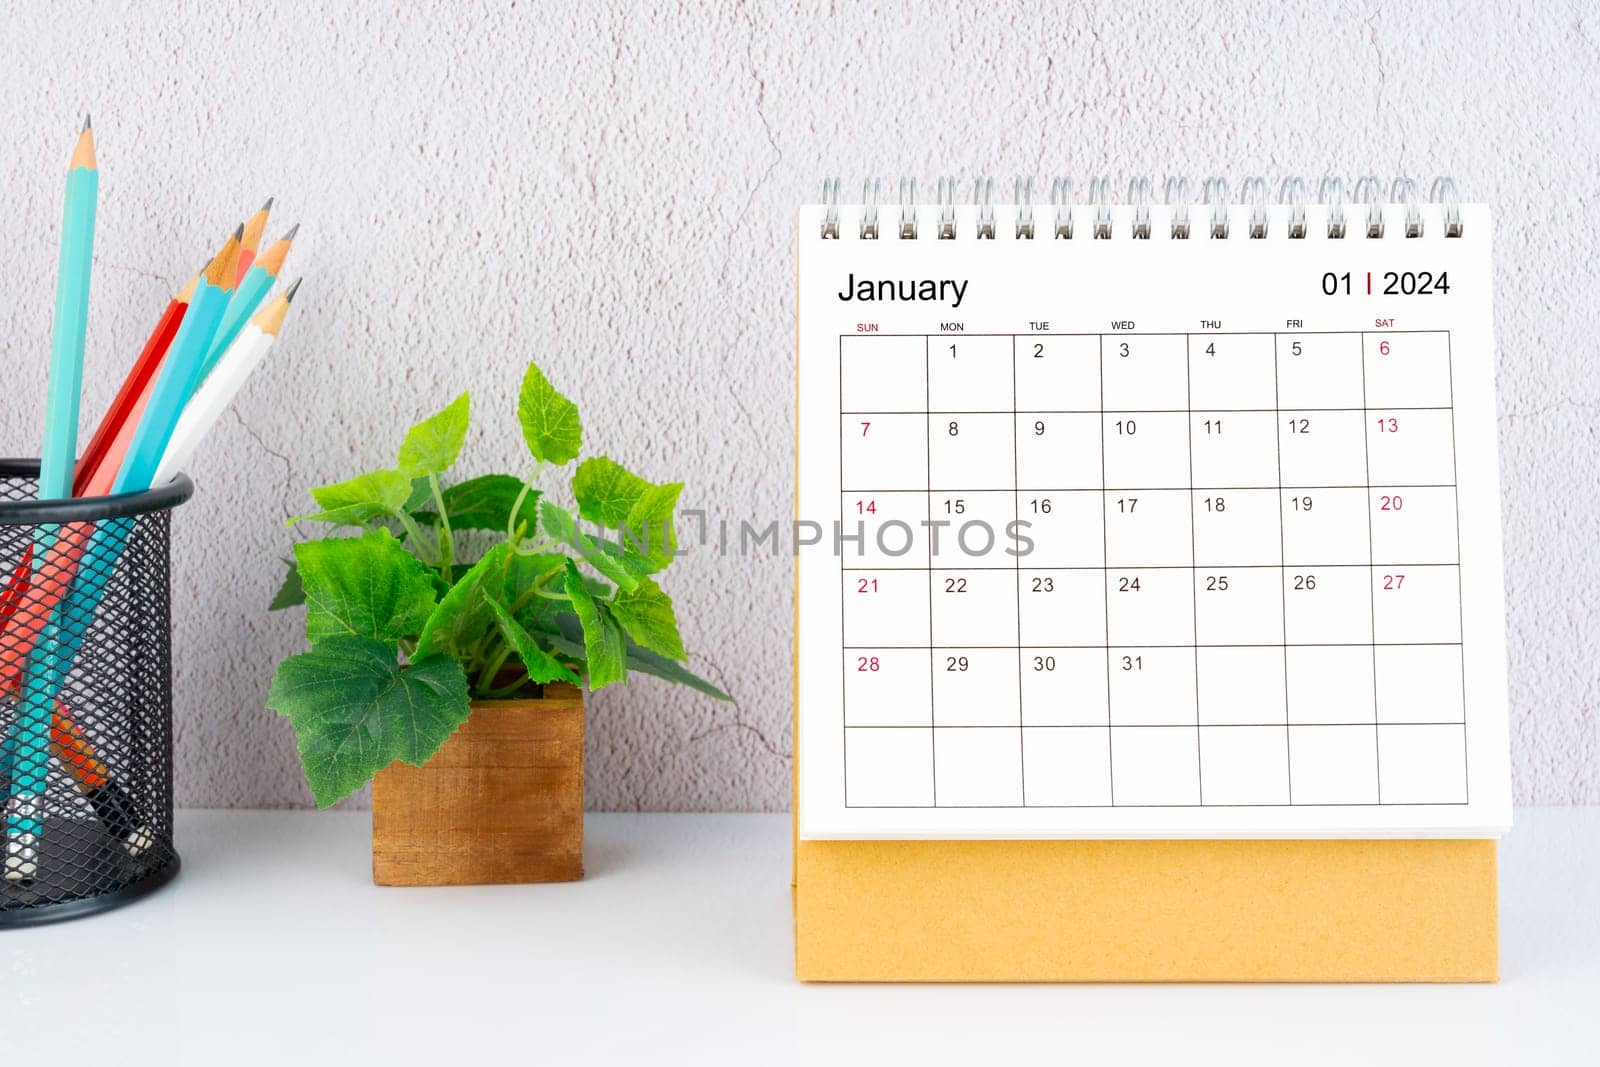 January 2024 Desk Calendar with pencil on white table.